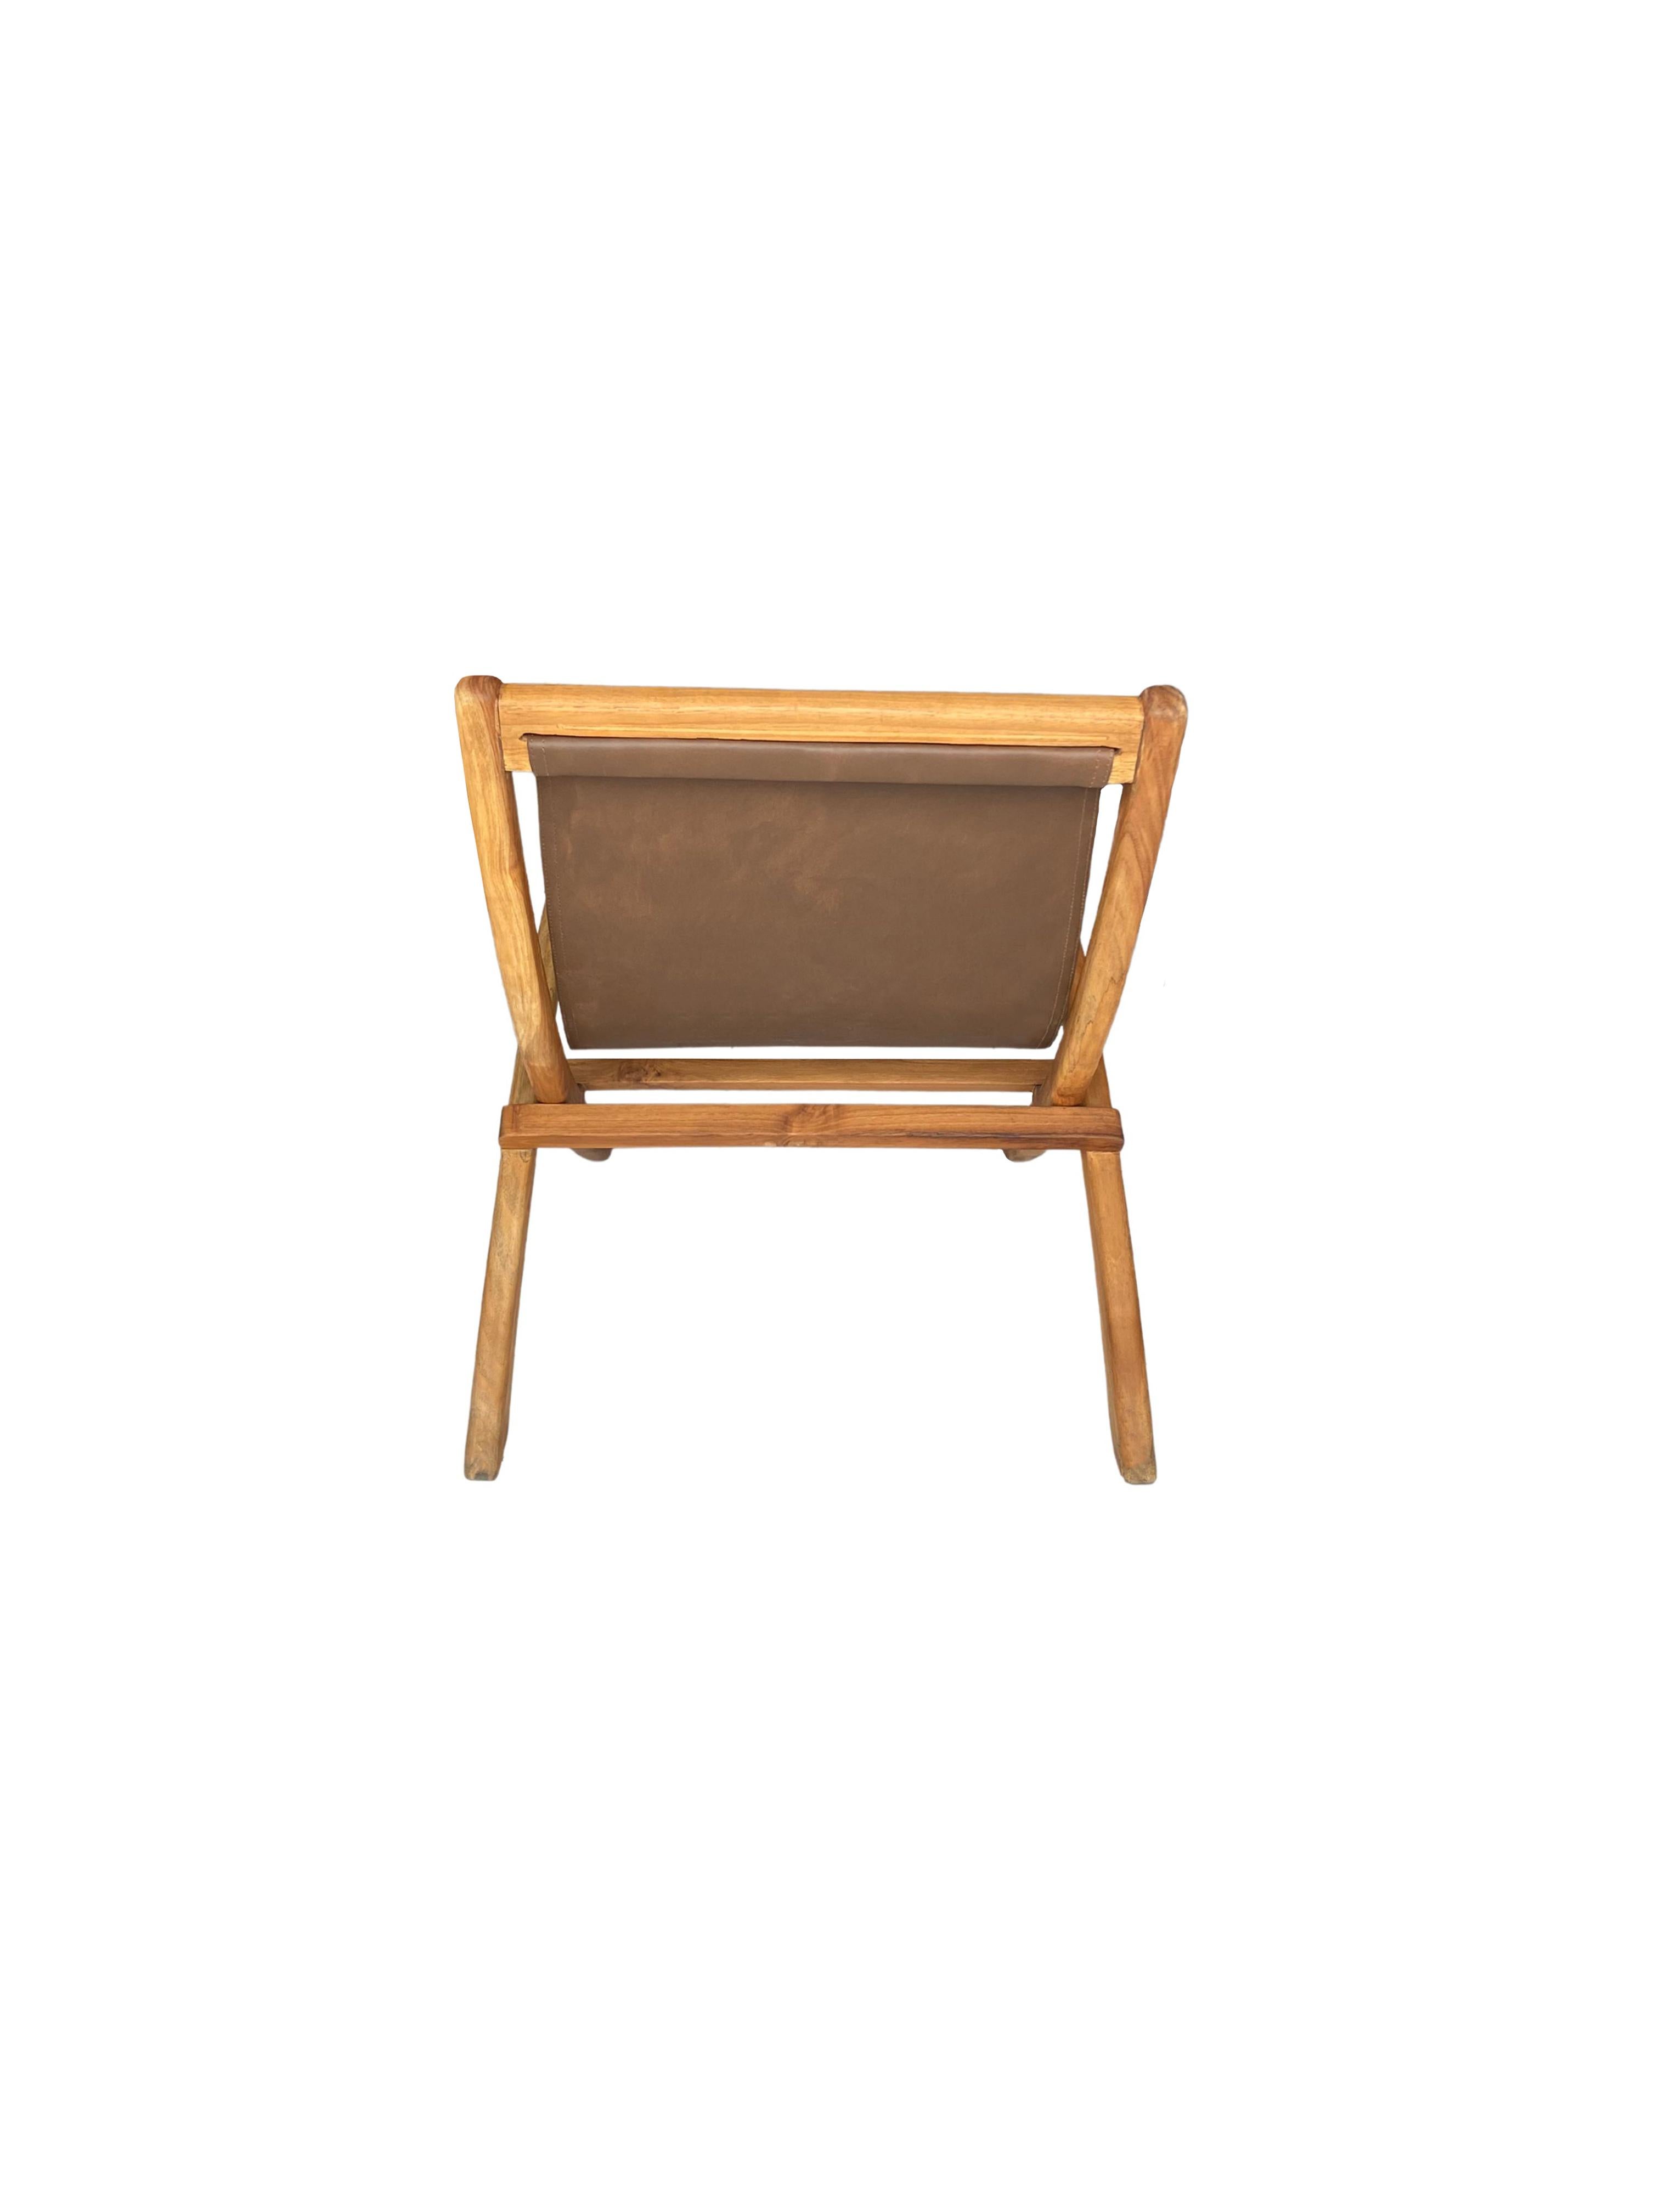 Hand-Crafted Foldable Teak Wood Framed Lounge Chair, with Hanging Leather Seat